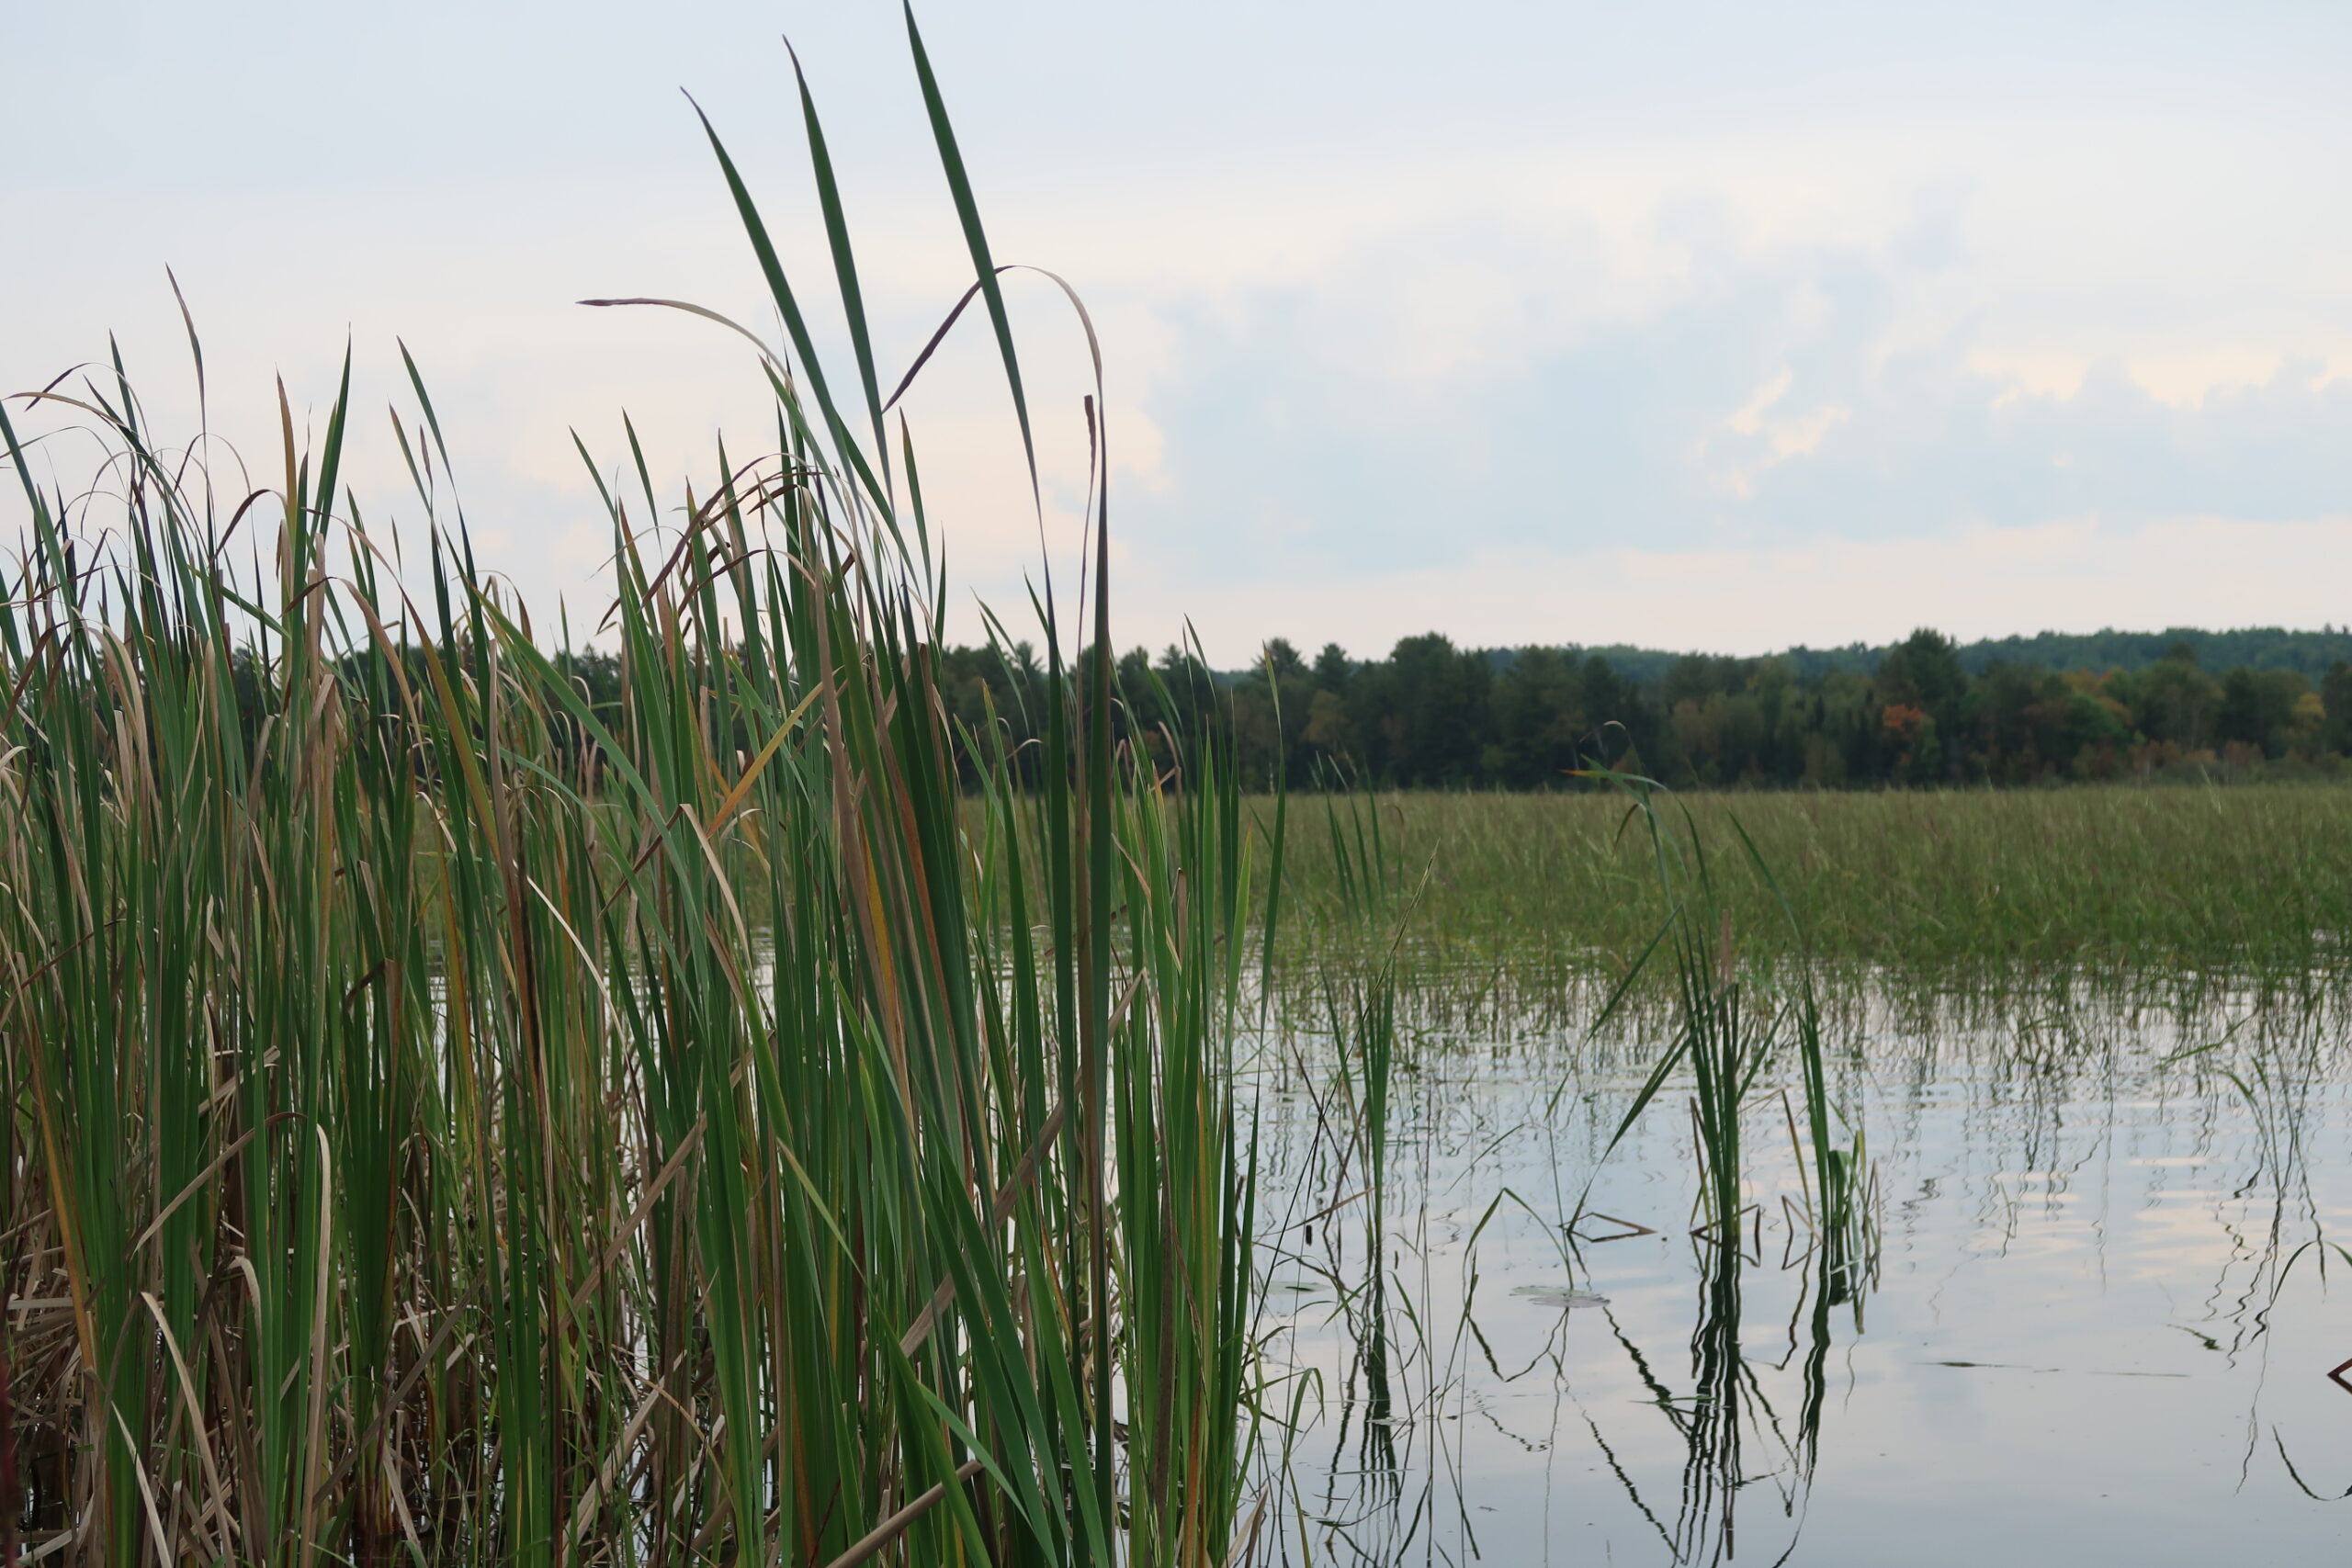 Research collaborative prioritizes Indigenous knowledge to better protect wild rice